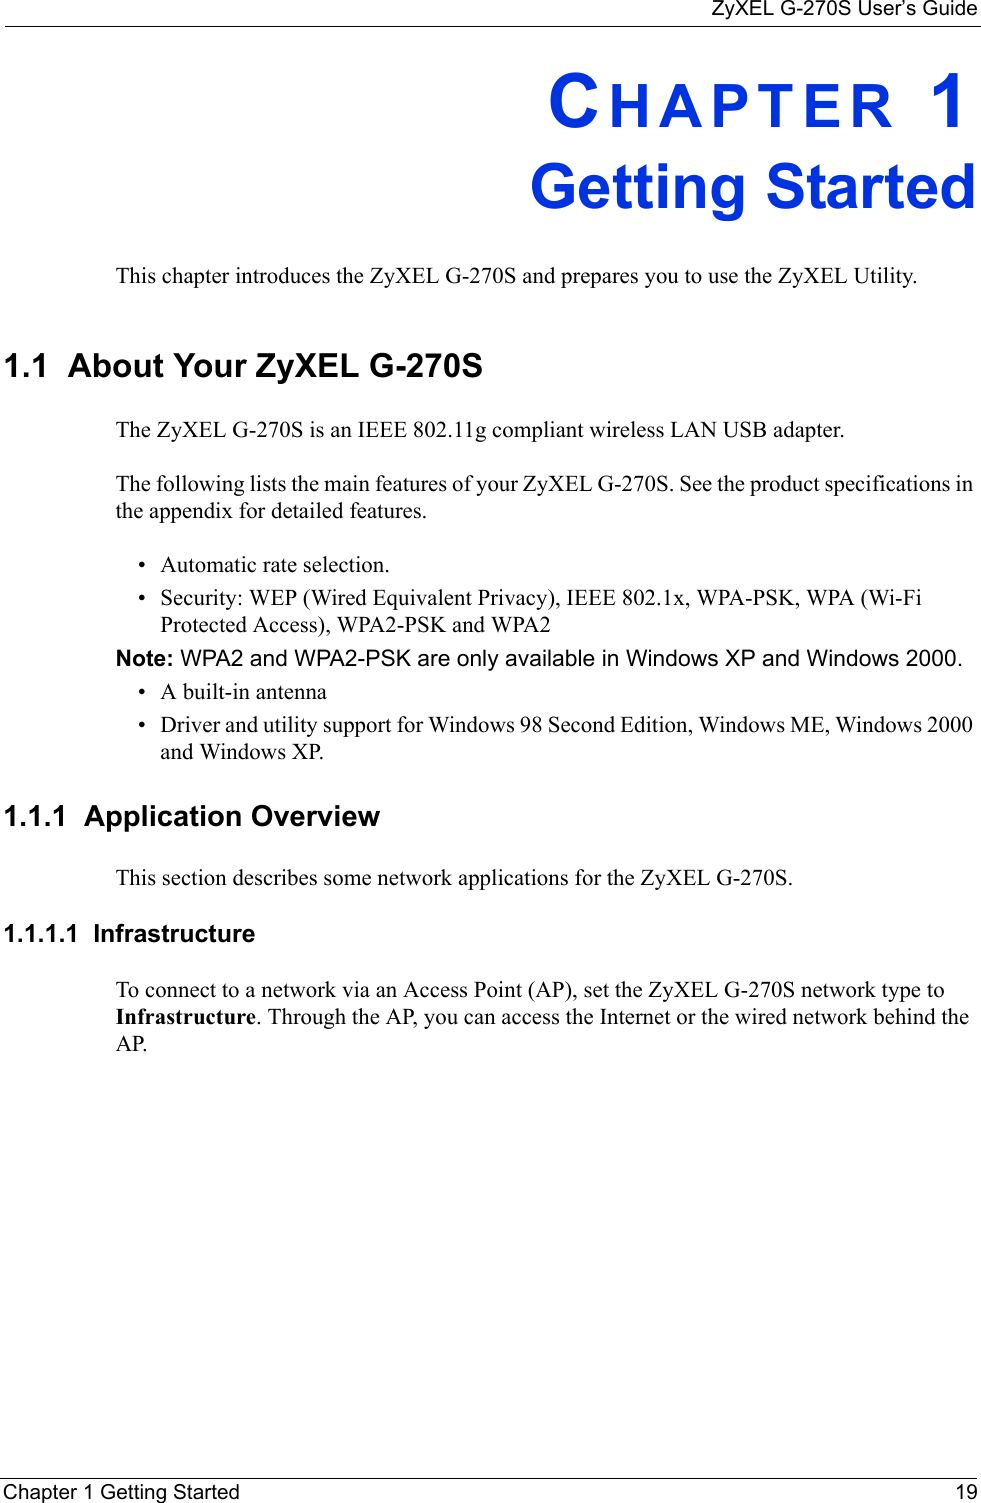 ZyXEL G-270S User’s GuideChapter 1 Getting Started 19CHAPTER 1Getting StartedThis chapter introduces the ZyXEL G-270S and prepares you to use the ZyXEL Utility.1.1  About Your ZyXEL G-270S    The ZyXEL G-270S is an IEEE 802.11g compliant wireless LAN USB adapter. The following lists the main features of your ZyXEL G-270S. See the product specifications in the appendix for detailed features.• Automatic rate selection.• Security: WEP (Wired Equivalent Privacy), IEEE 802.1x, WPA-PSK, WPA (Wi-Fi Protected Access), WPA2-PSK and WPA2 Note: WPA2 and WPA2-PSK are only available in Windows XP and Windows 2000.• A built-in antenna• Driver and utility support for Windows 98 Second Edition, Windows ME, Windows 2000 and Windows XP.1.1.1  Application OverviewThis section describes some network applications for the ZyXEL G-270S. 1.1.1.1  Infrastructure To connect to a network via an Access Point (AP), set the ZyXEL G-270S network type to Infrastructure. Through the AP, you can access the Internet or the wired network behind the AP.  